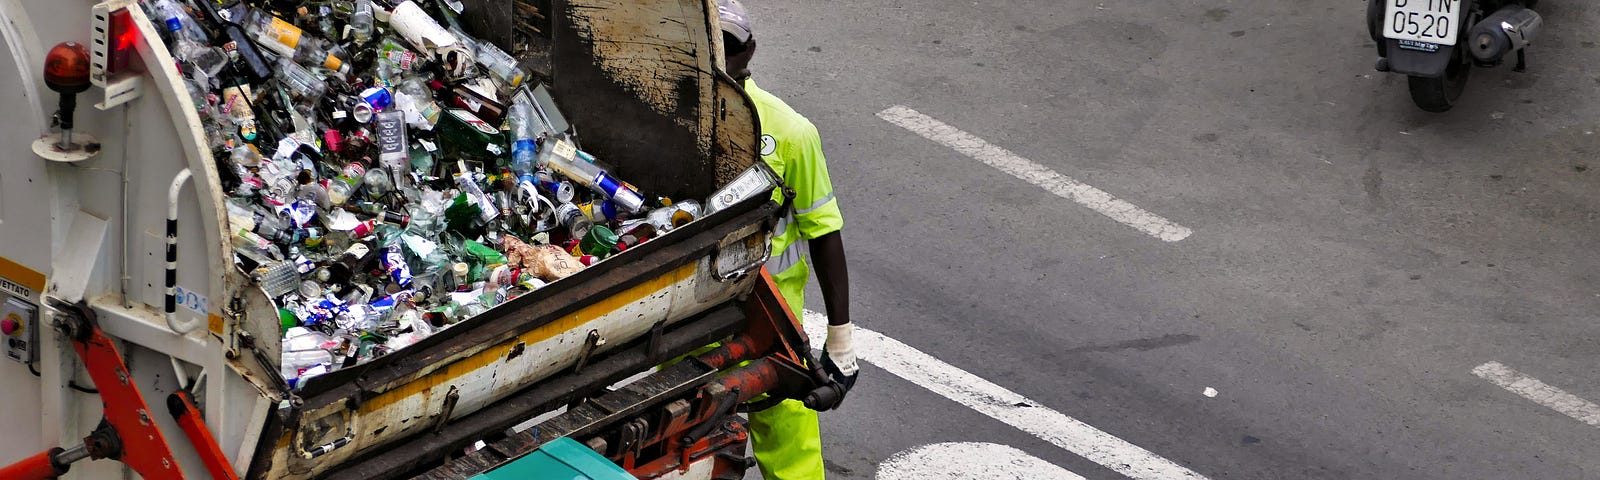 the image is that of the back of a dump truck that is carting away household waste; it is parked in the street and there are two men loading a cart into the back.